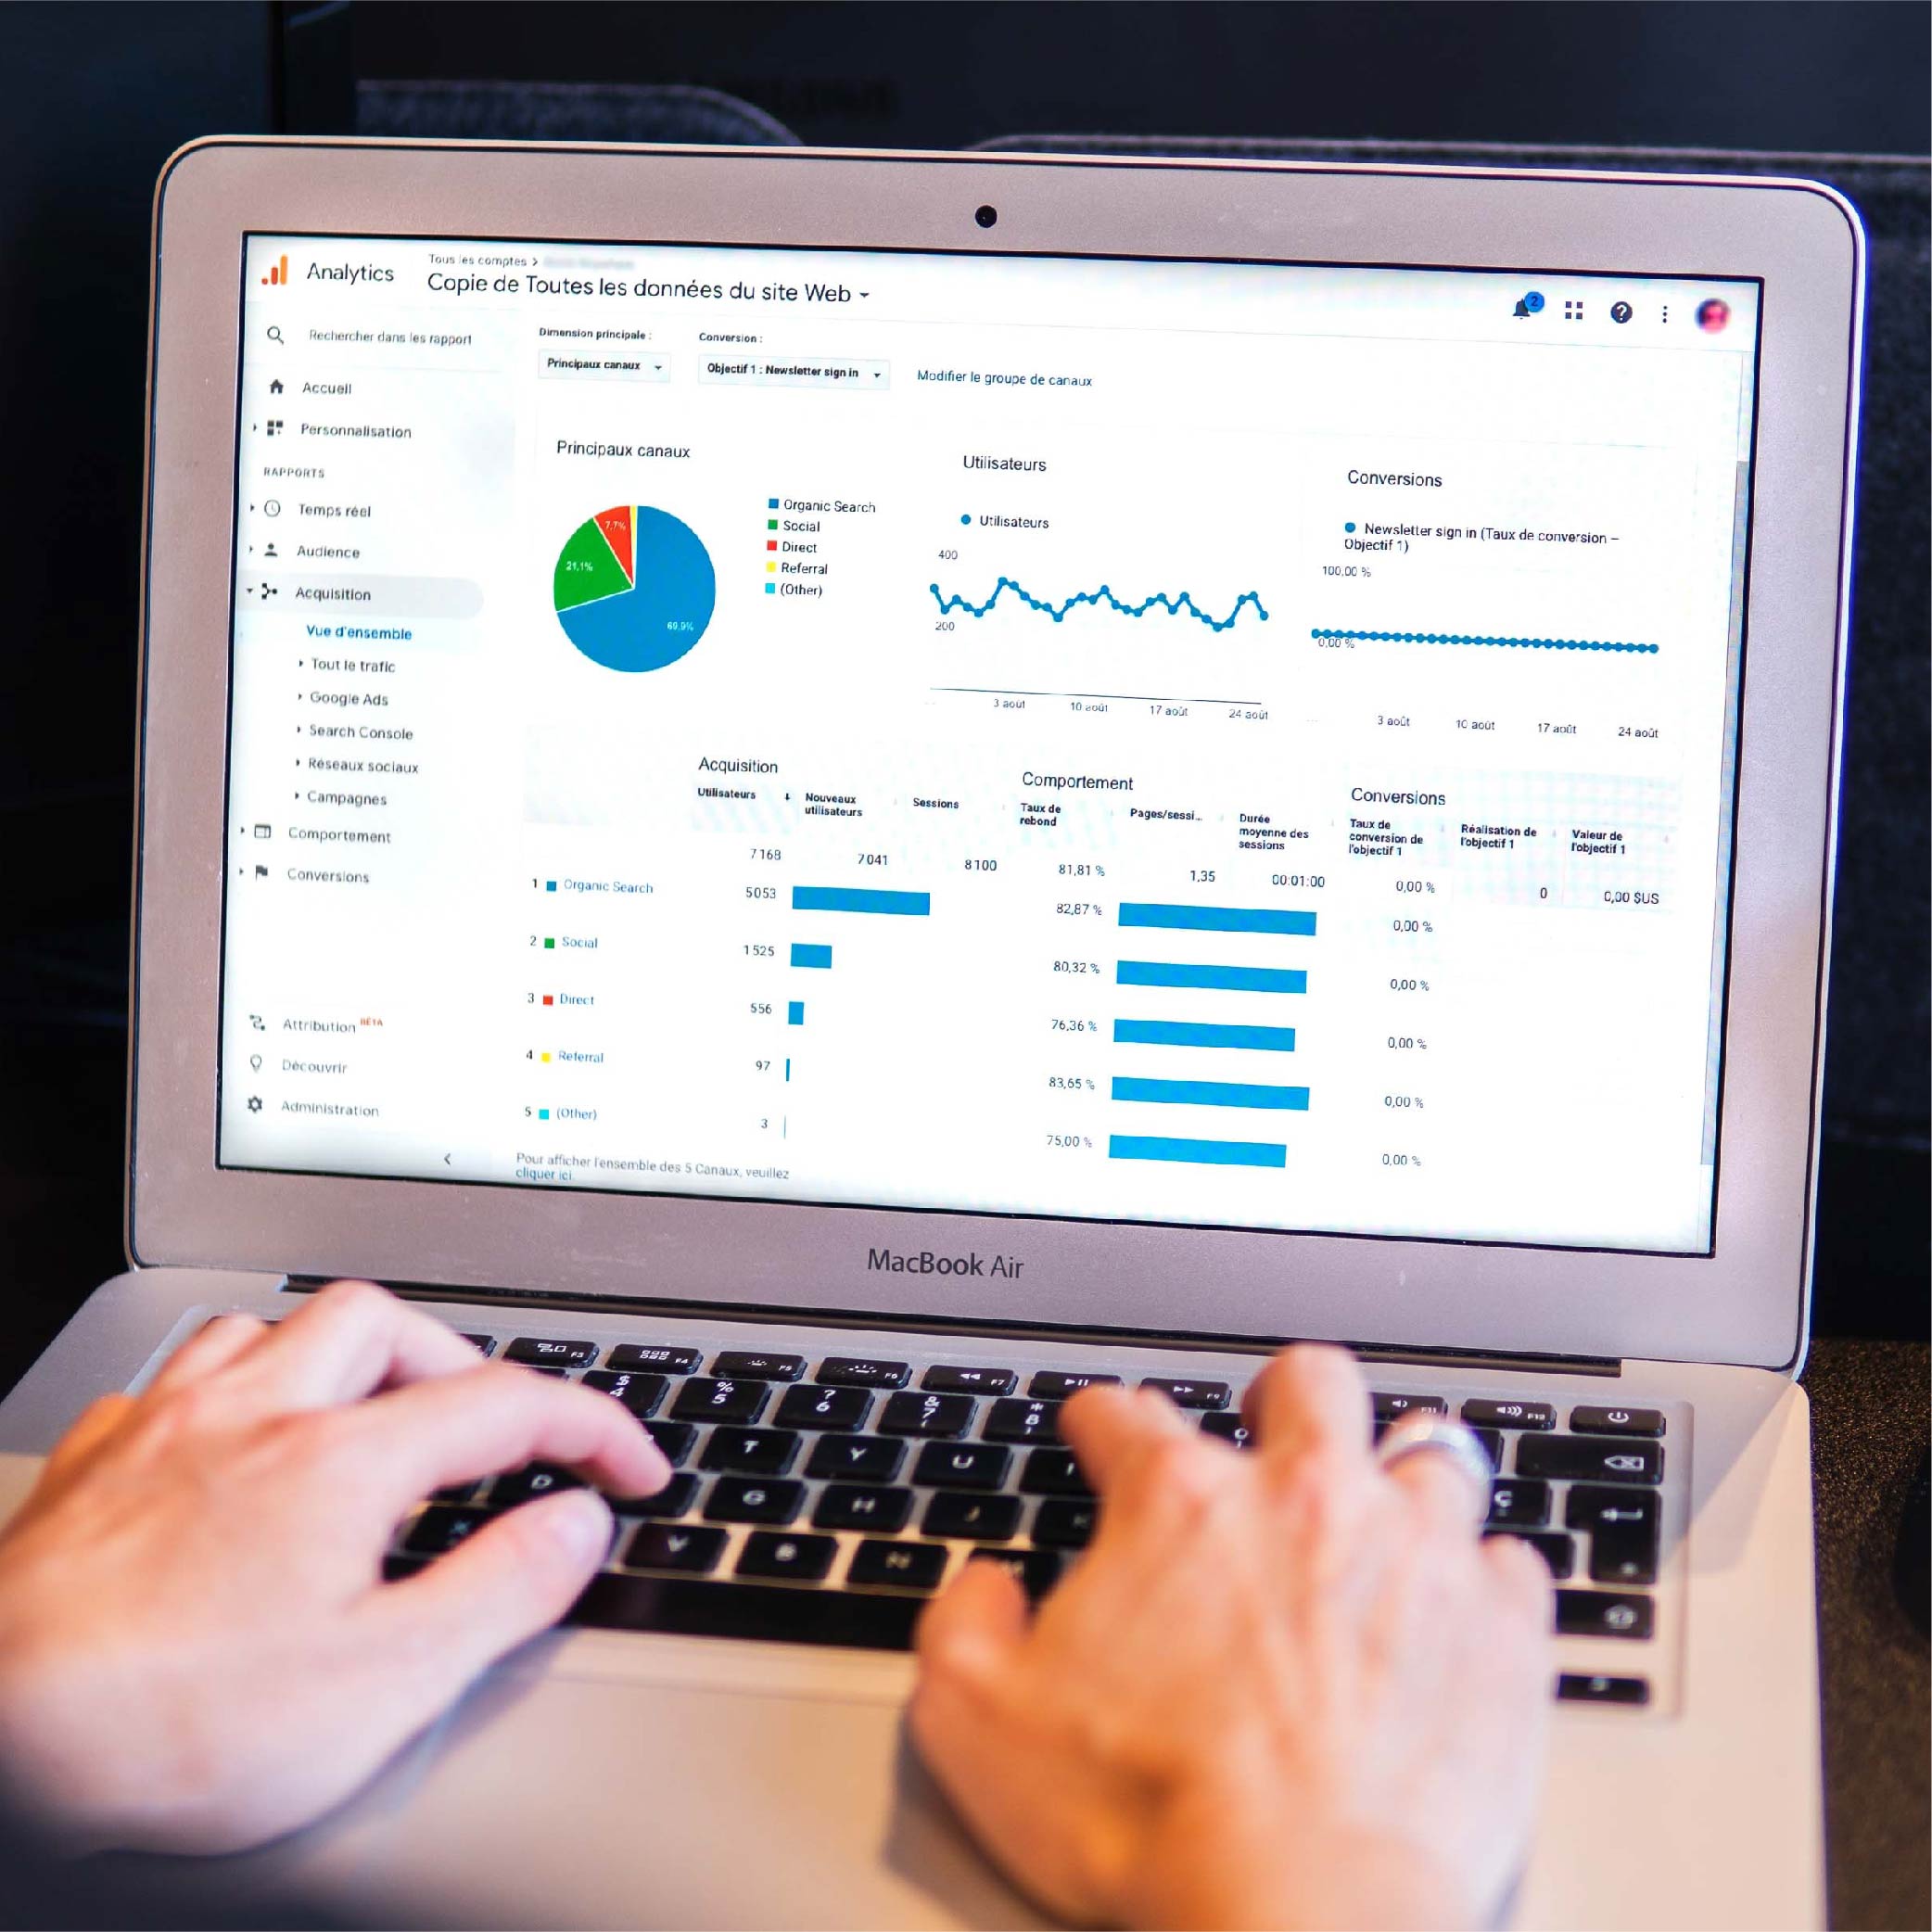 Integrated Google Analytics to study your audience and grow your business.